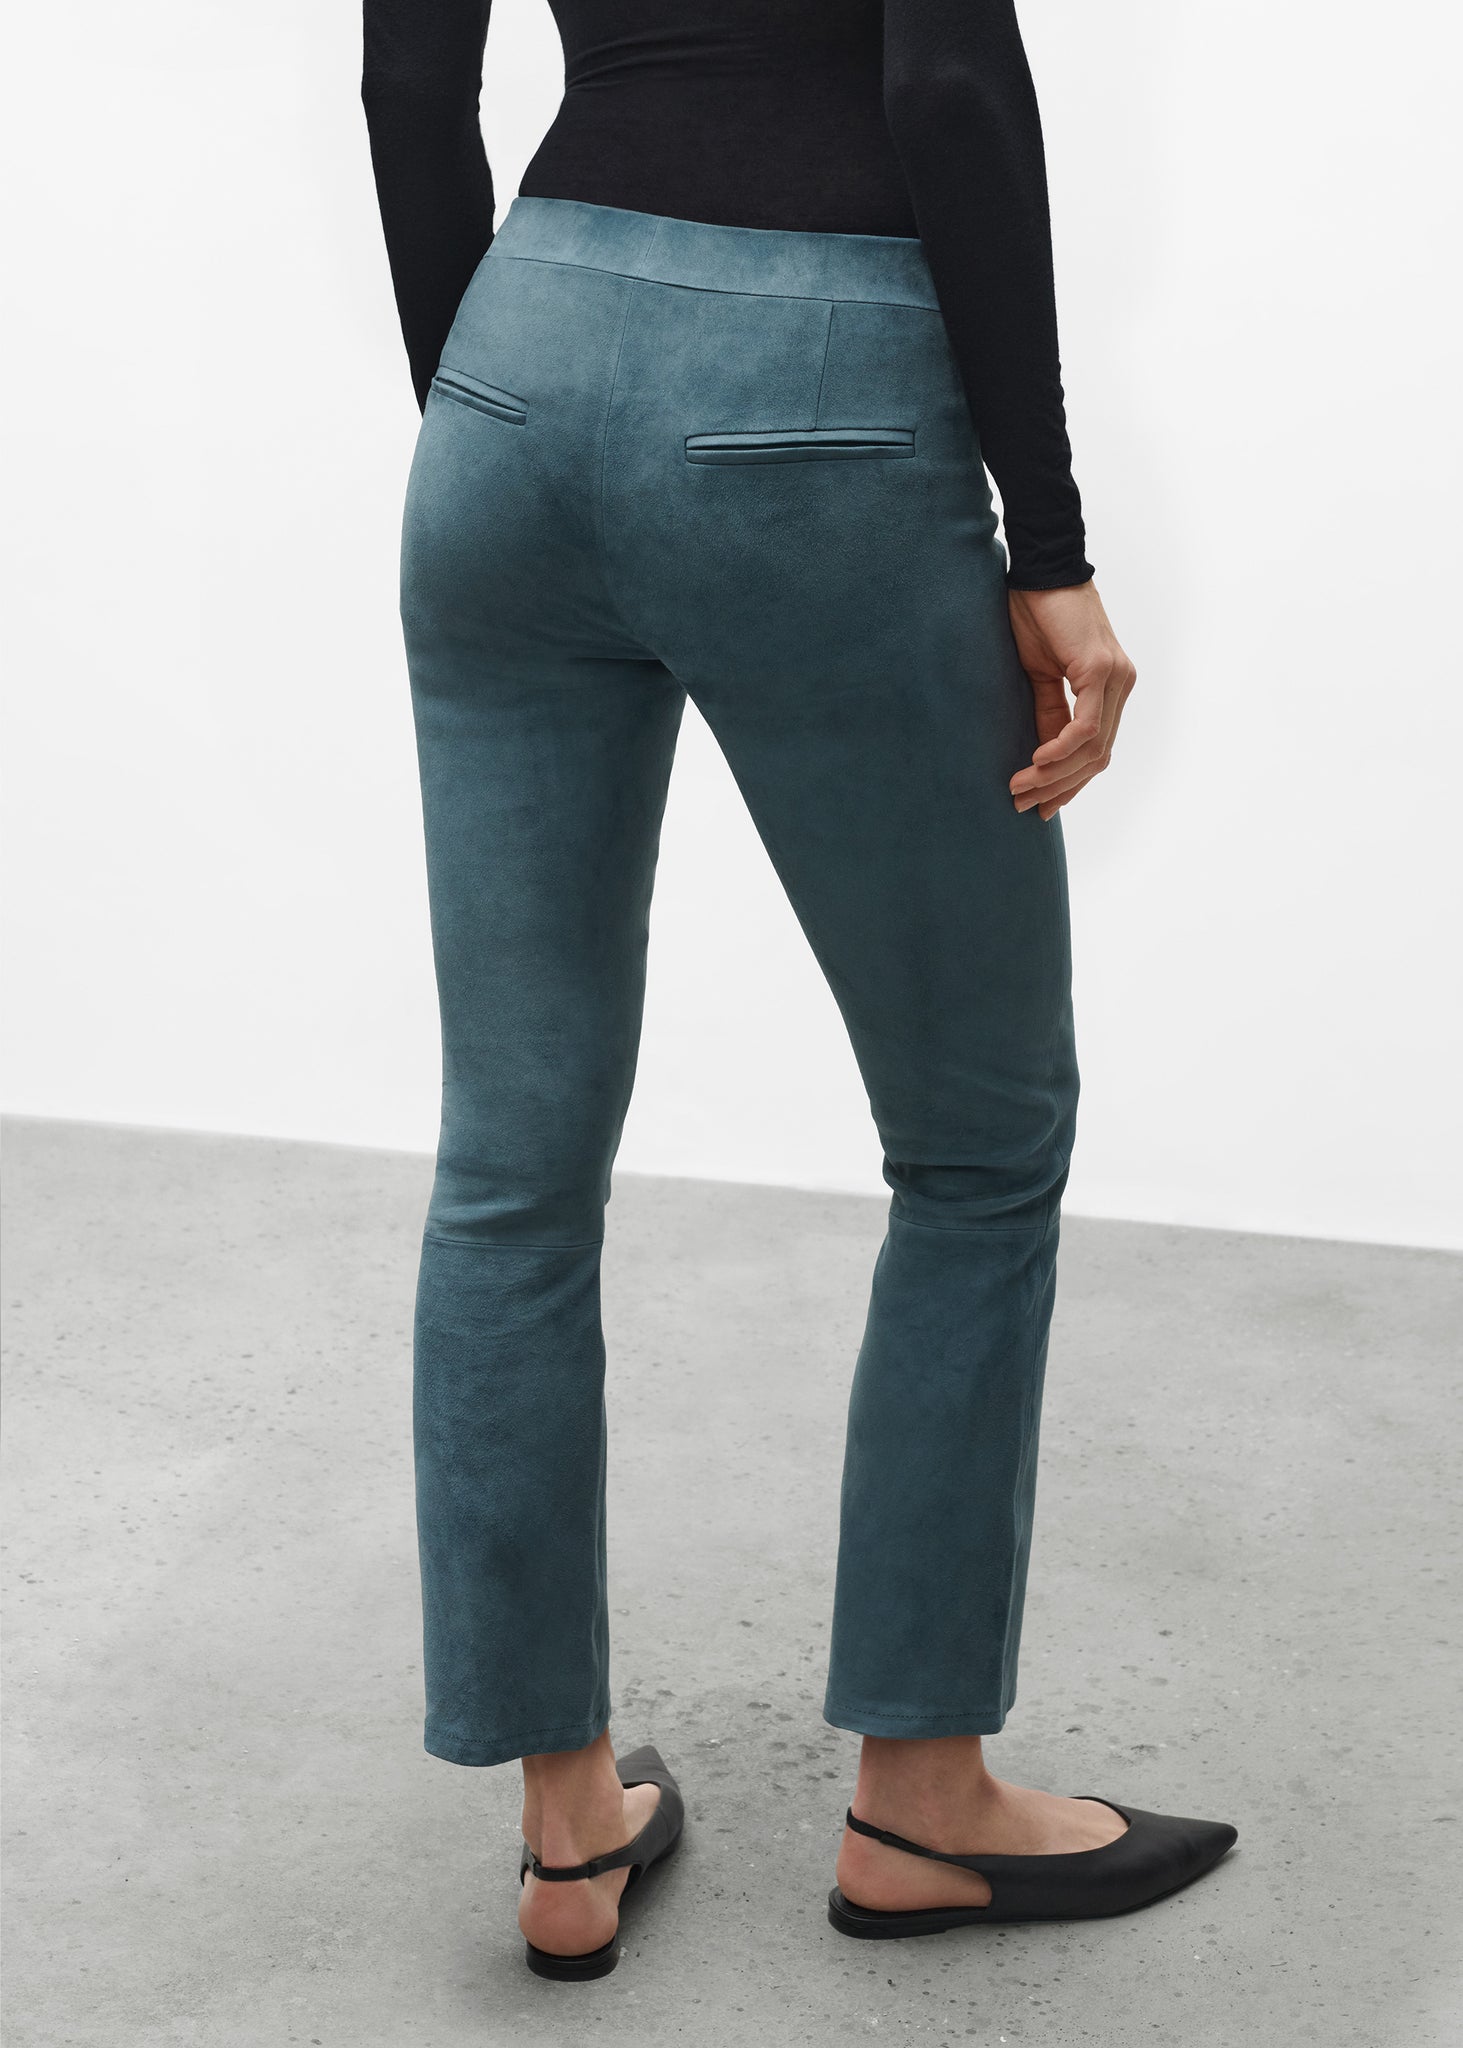 LIVELY | Suede Stretch Trousers